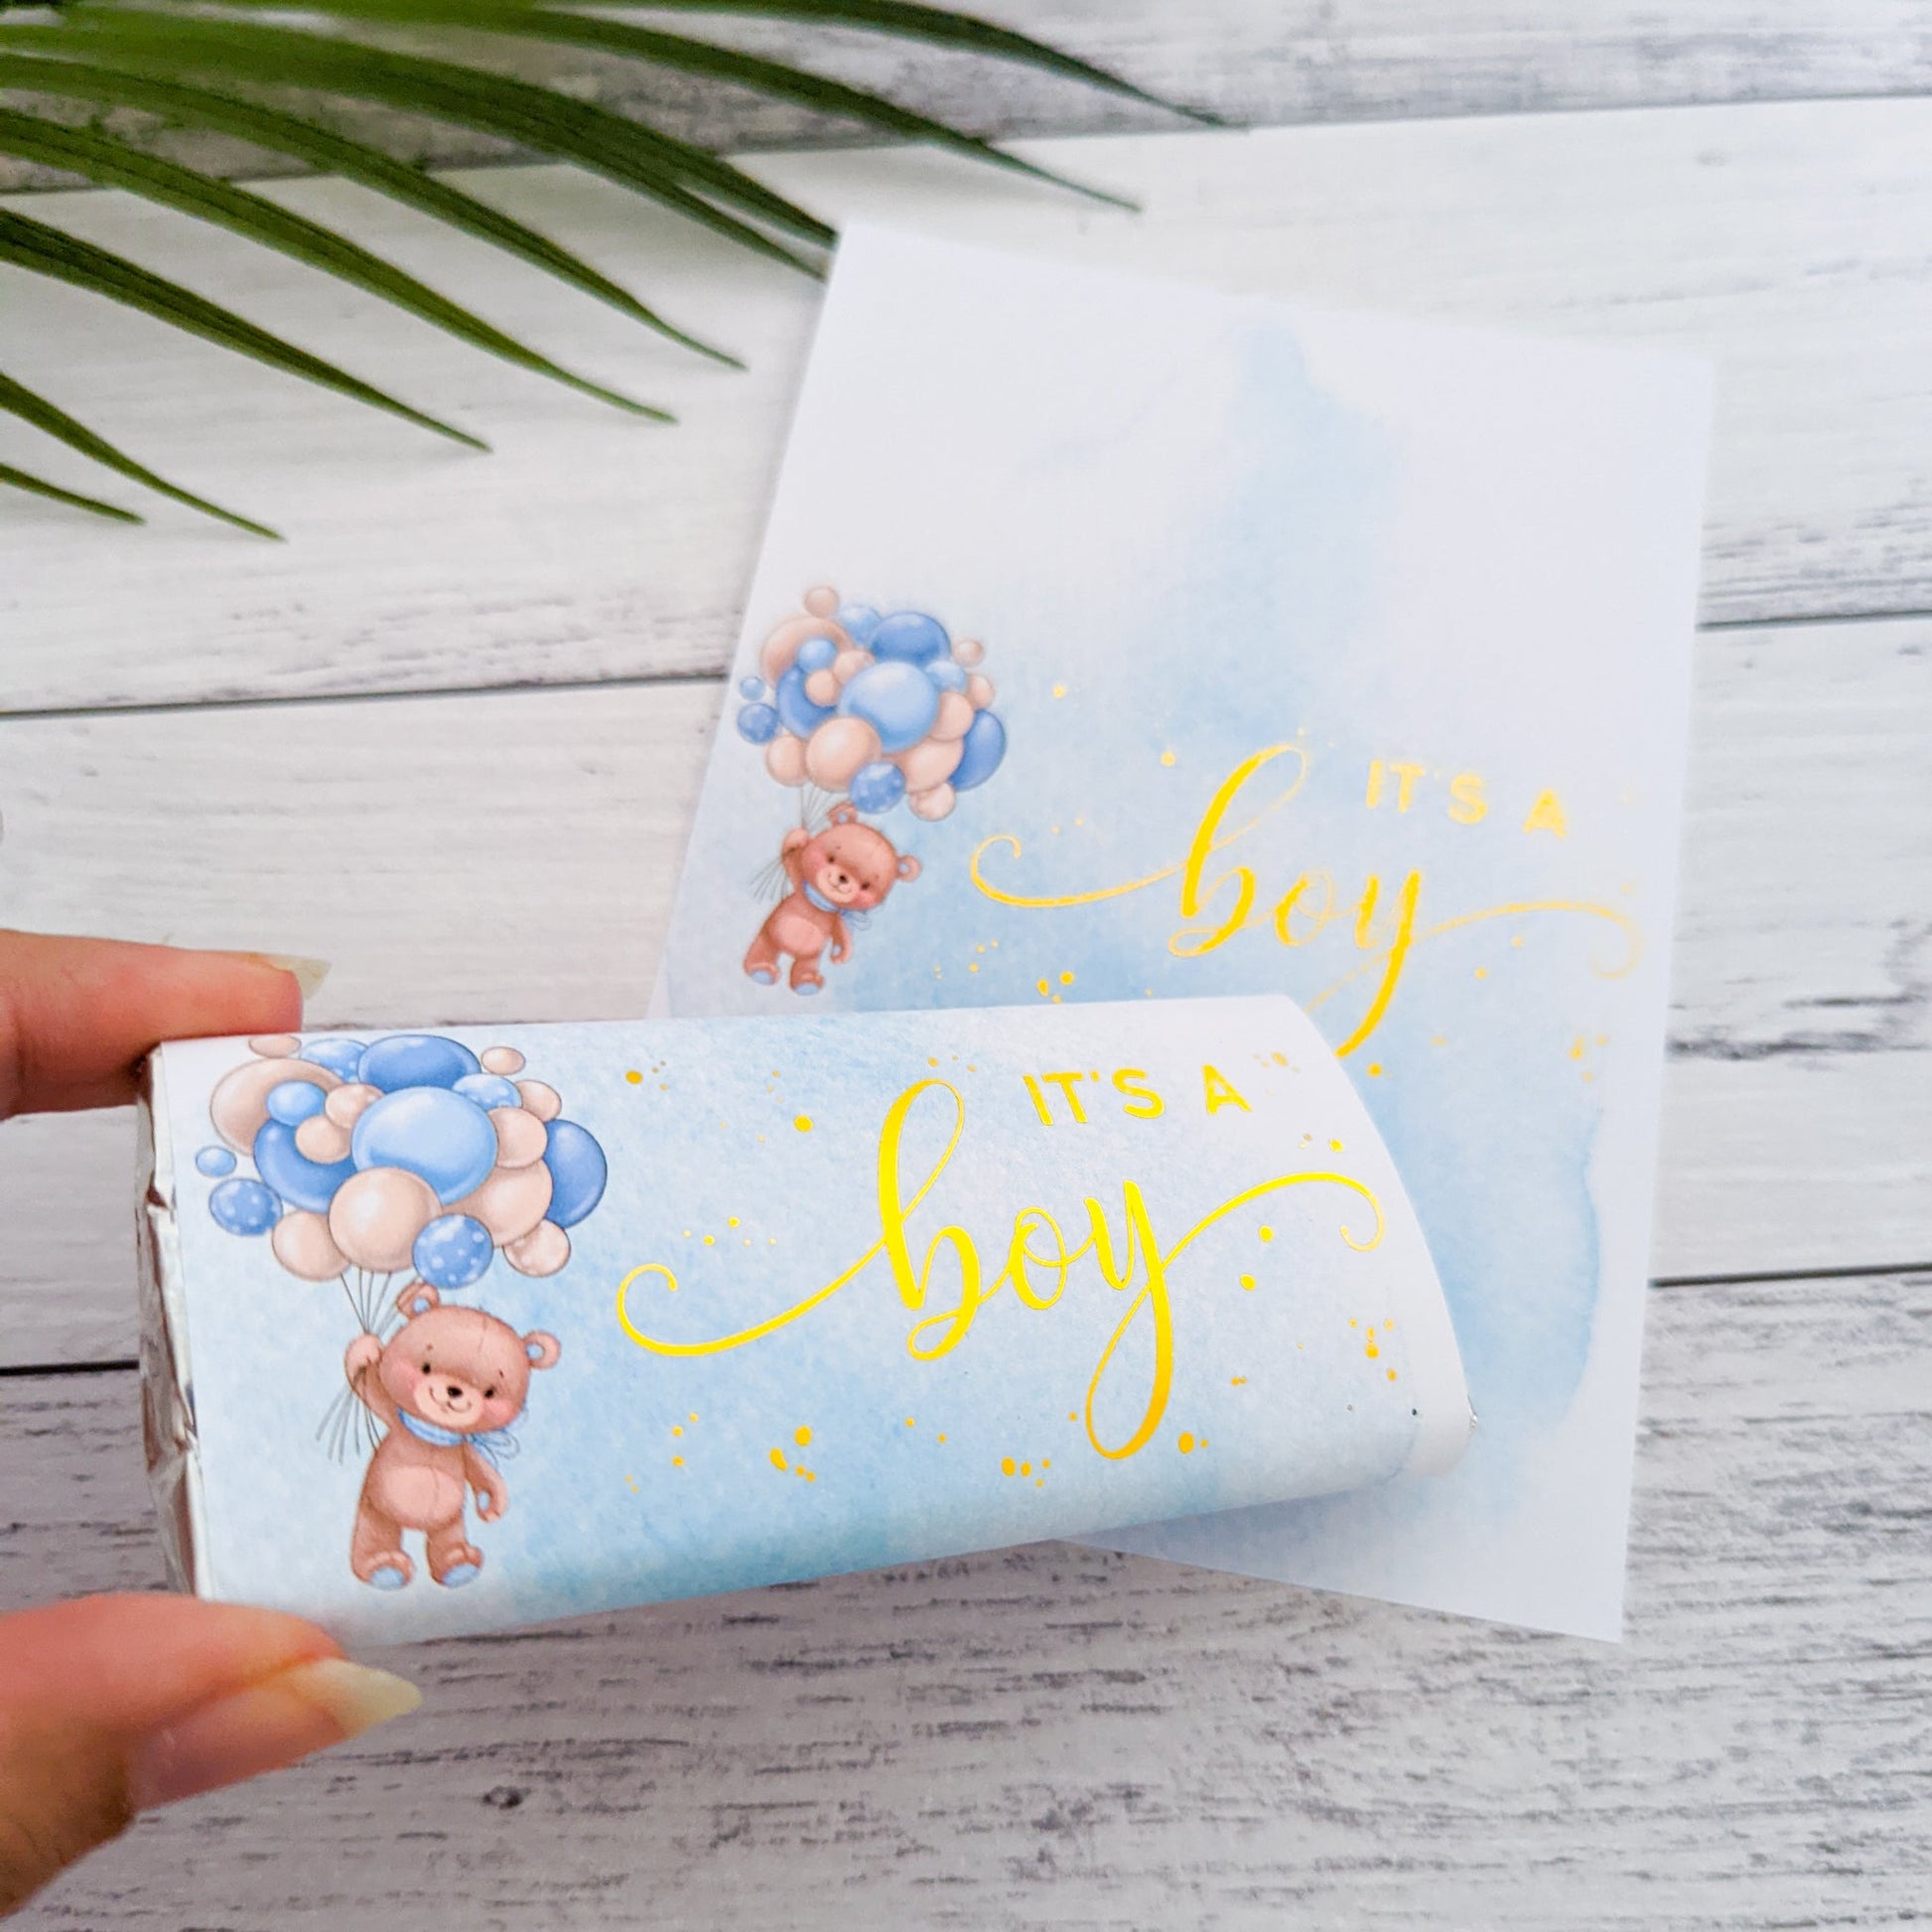 E&L Designs It's a Boy / Girl Chocolate Wrappers, Set of 10